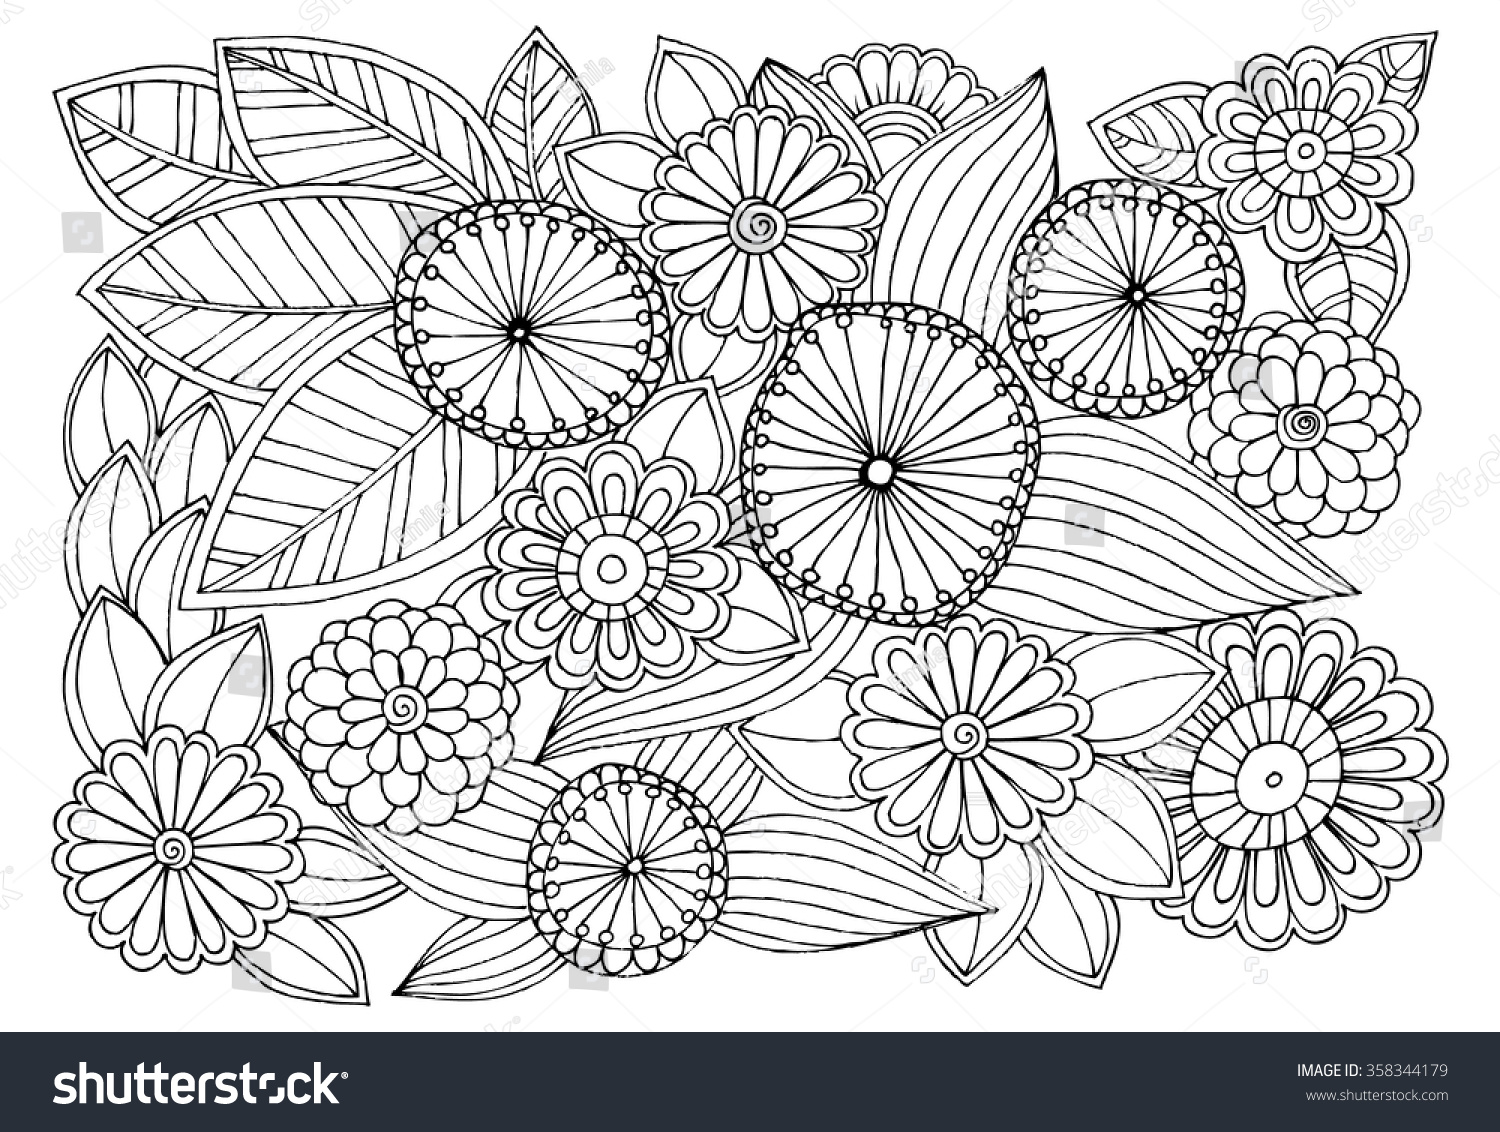 garden zentangle coloring pages - photo #17